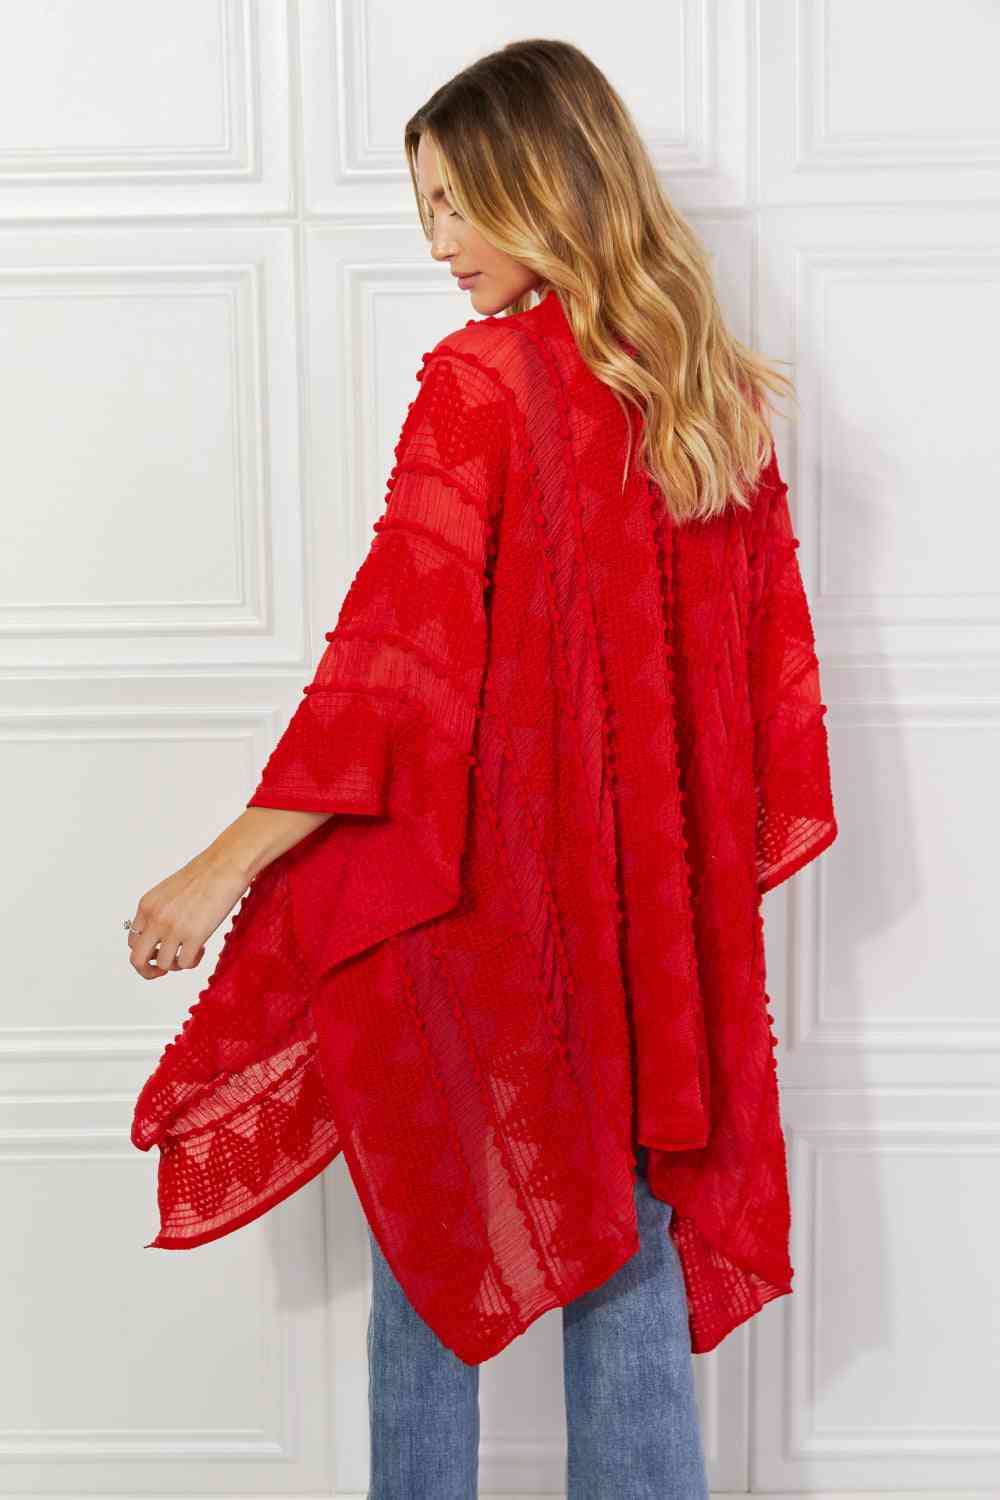 Pom-Pom Asymmetrical Poncho Cardigan in Red - Red / One Size - Women’s Clothing & Accessories - Outerwear - 10 - 2024